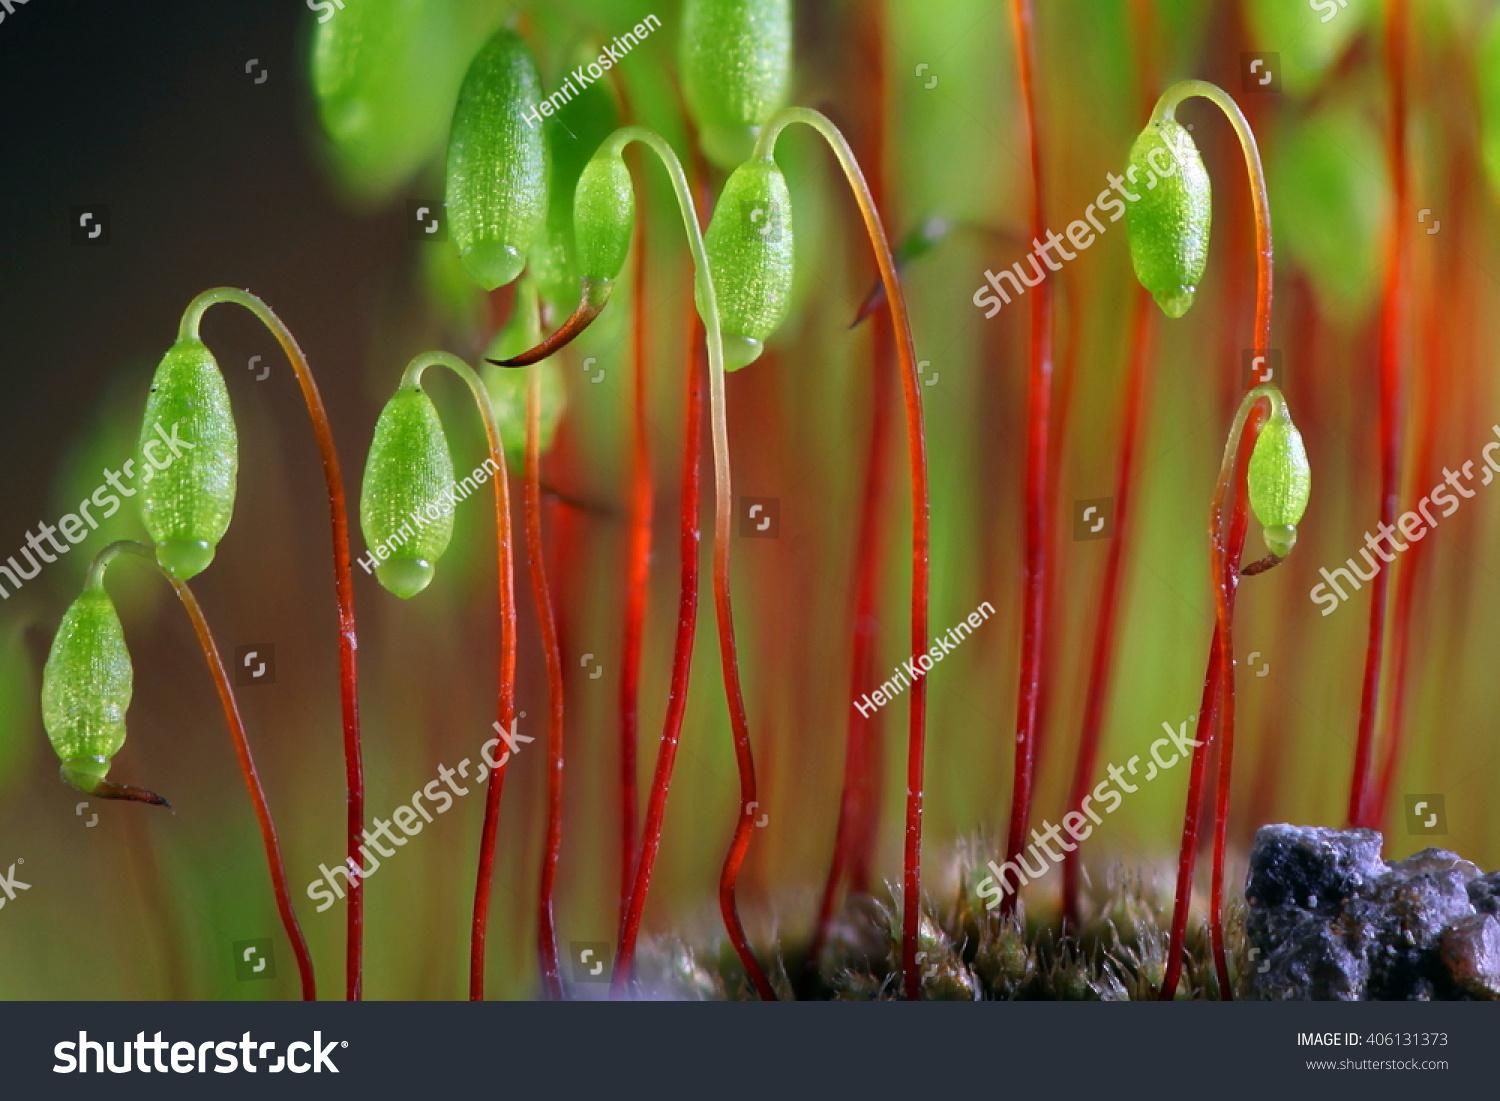 stock-photo-pohlia-moss-pohlia-nutans-artistic-composition-this-is-a-very-common-moss-with-world-wide-406131373.jpg